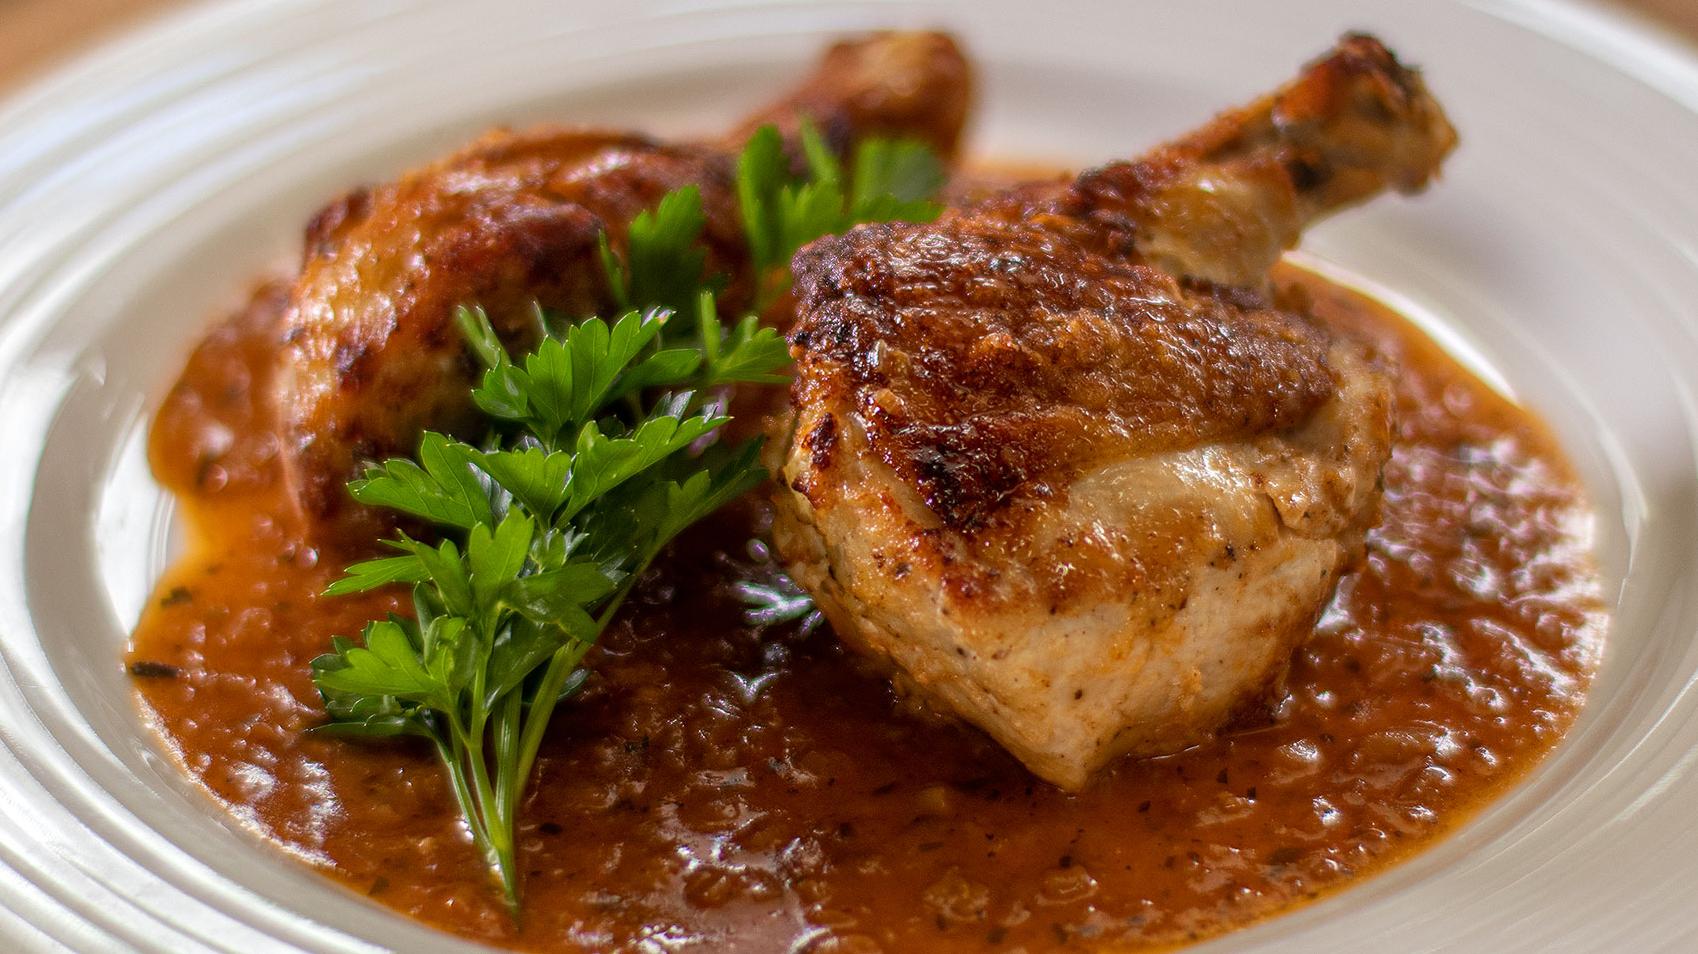  Chicken in red wine vinegar: a simple recipe that packs a flavorful punch.